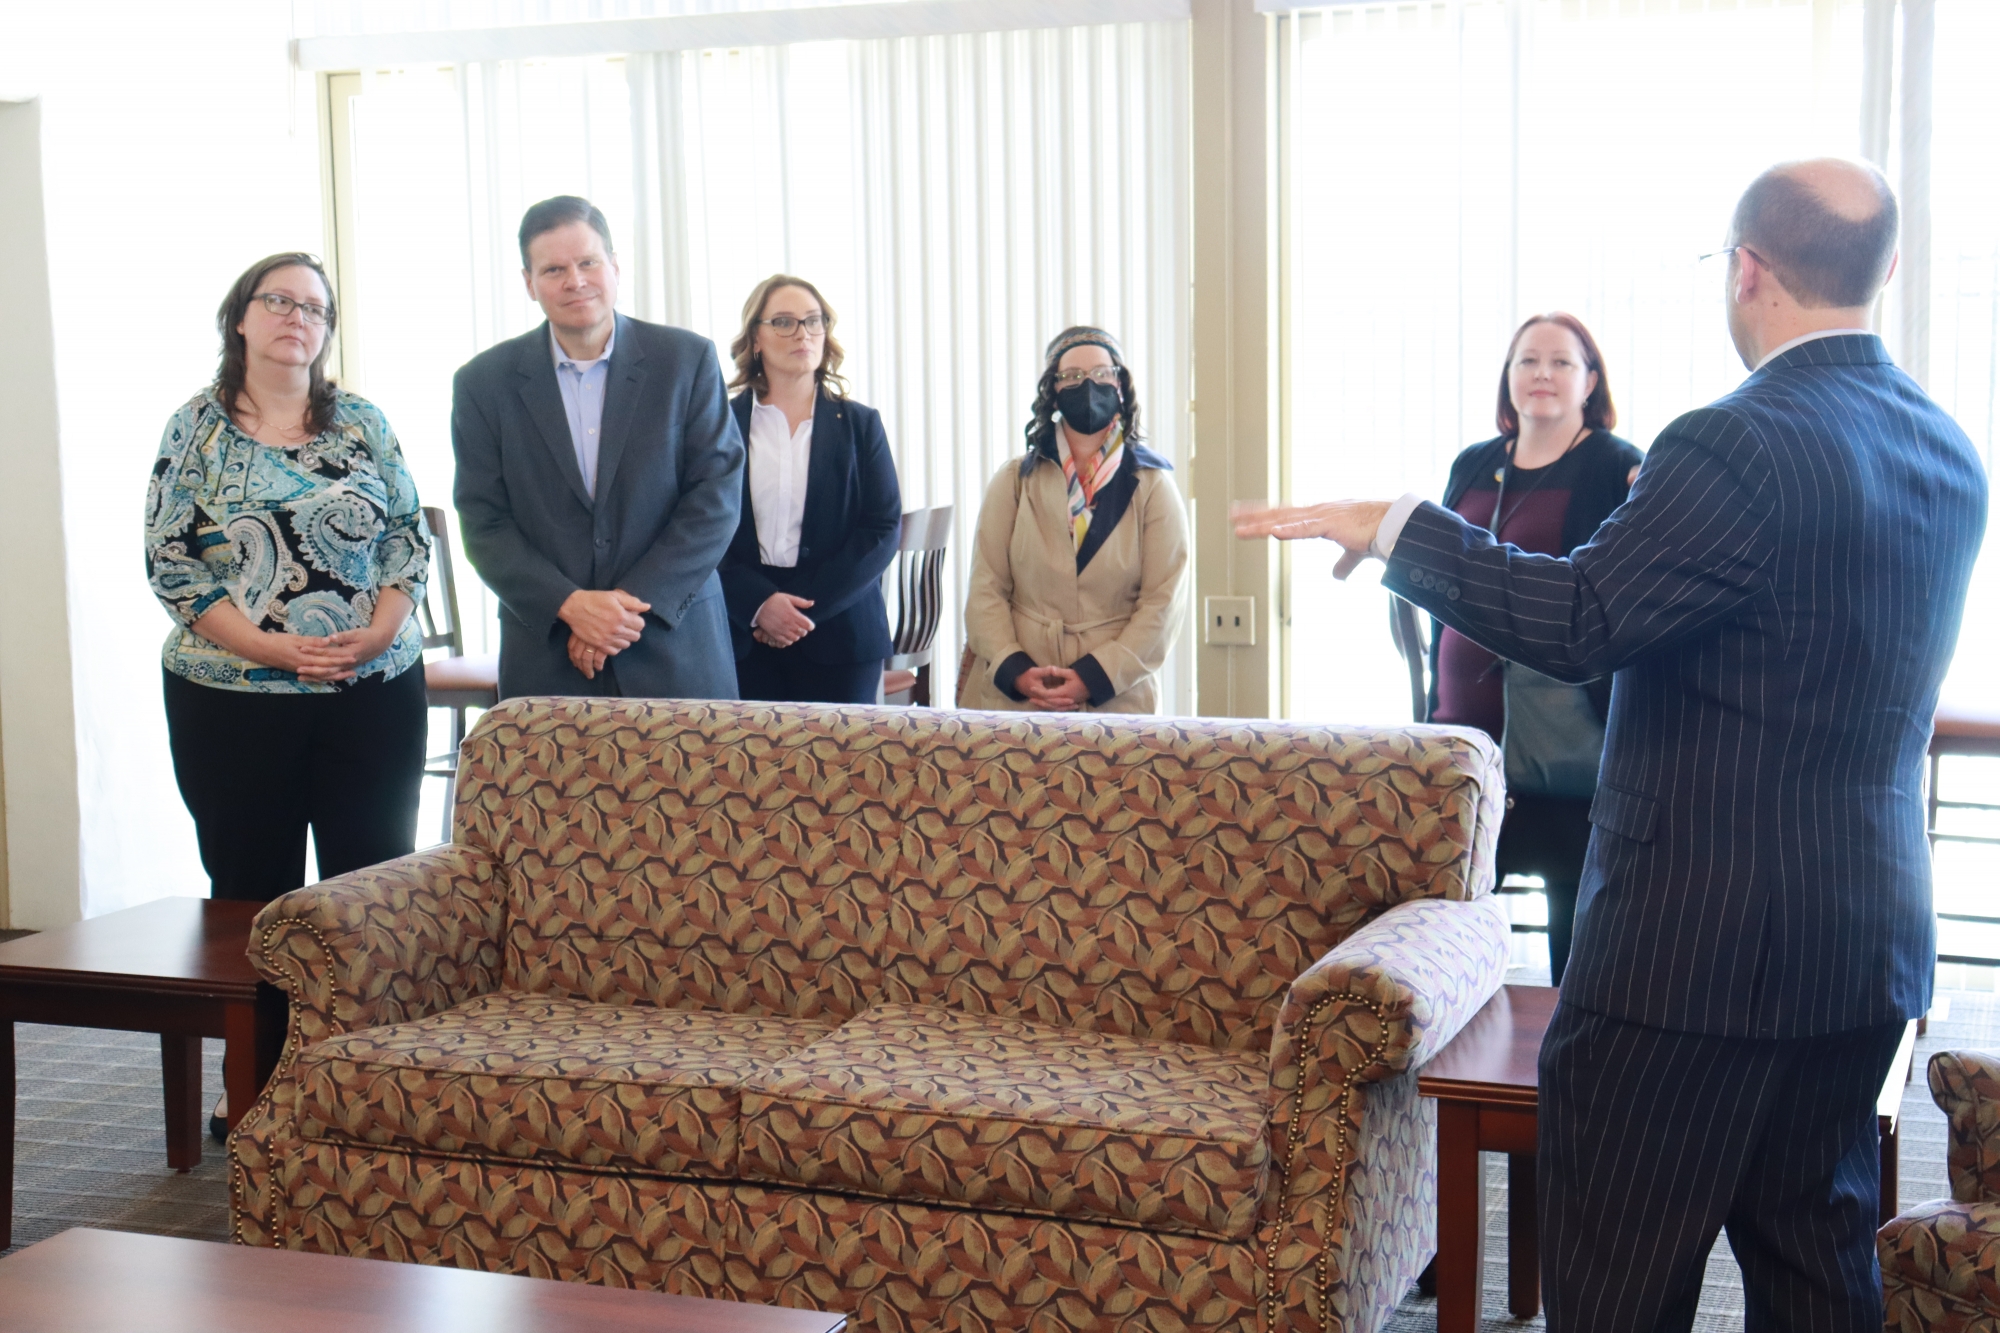 Dr. Stephen Stunder joined members of the Neurodiversity Team in offering tours of the SugarLoaf Campus.